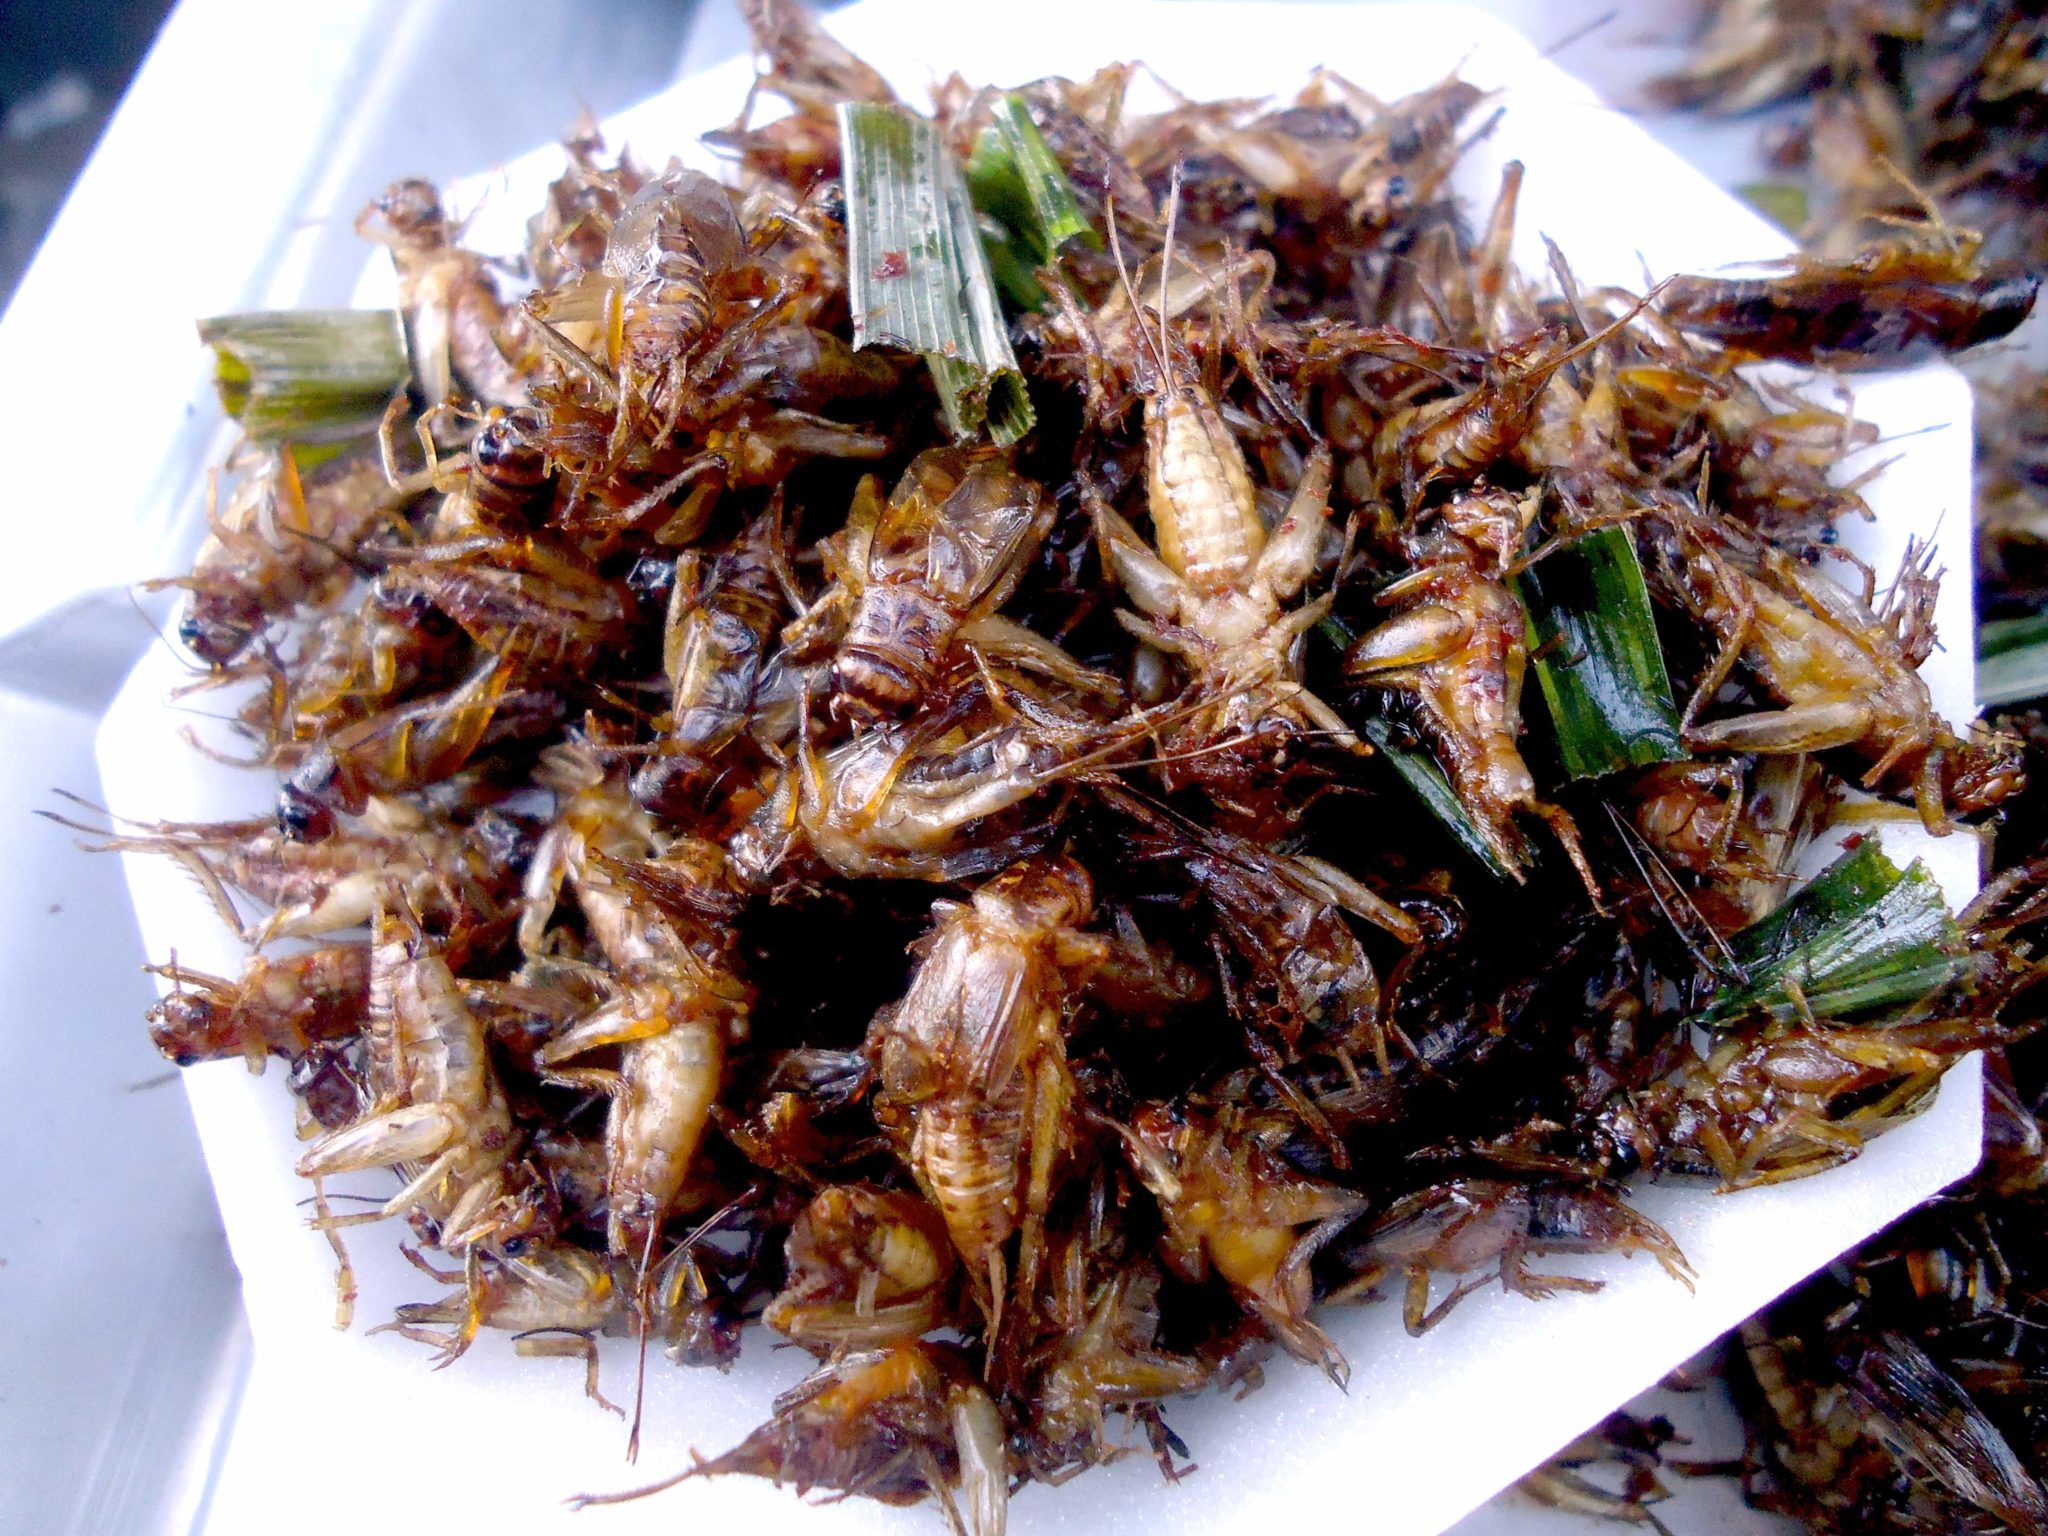 what is the food of insects